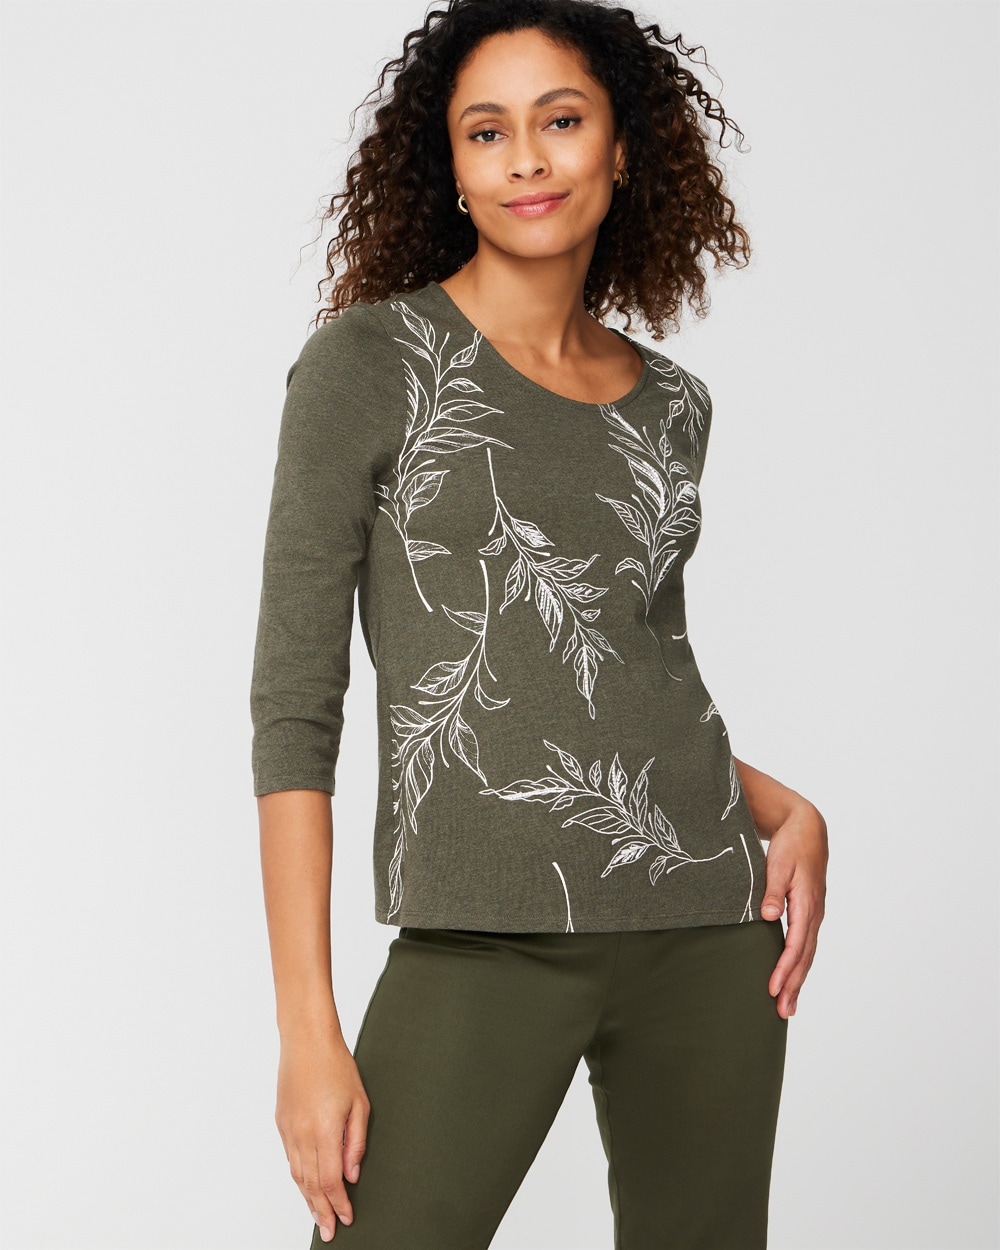 Leafy Willows Embellished Top